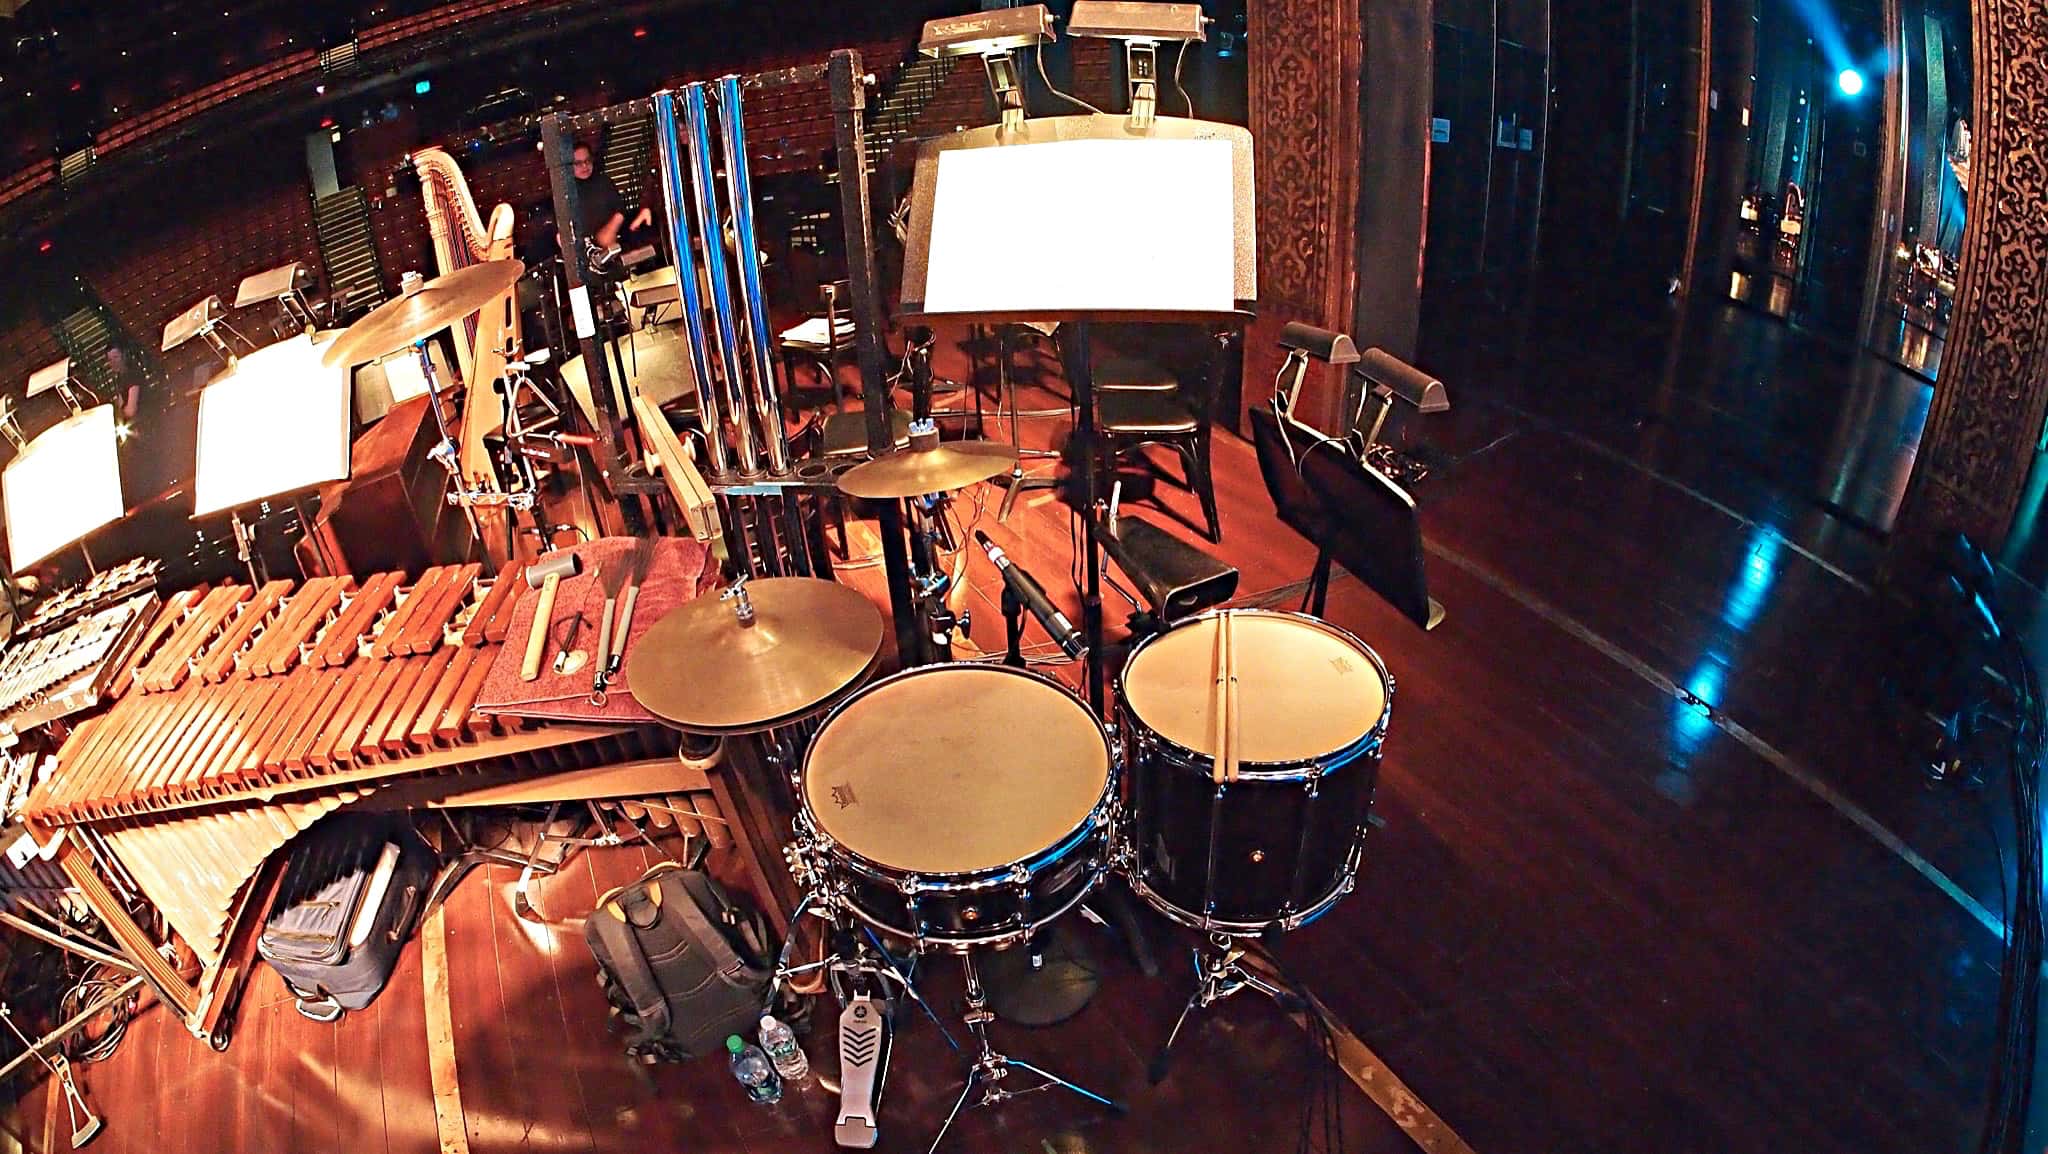 Billy Miller's setup for the Lincoln Center Benefit Concert of the Broadway show The Light In The Piazza.